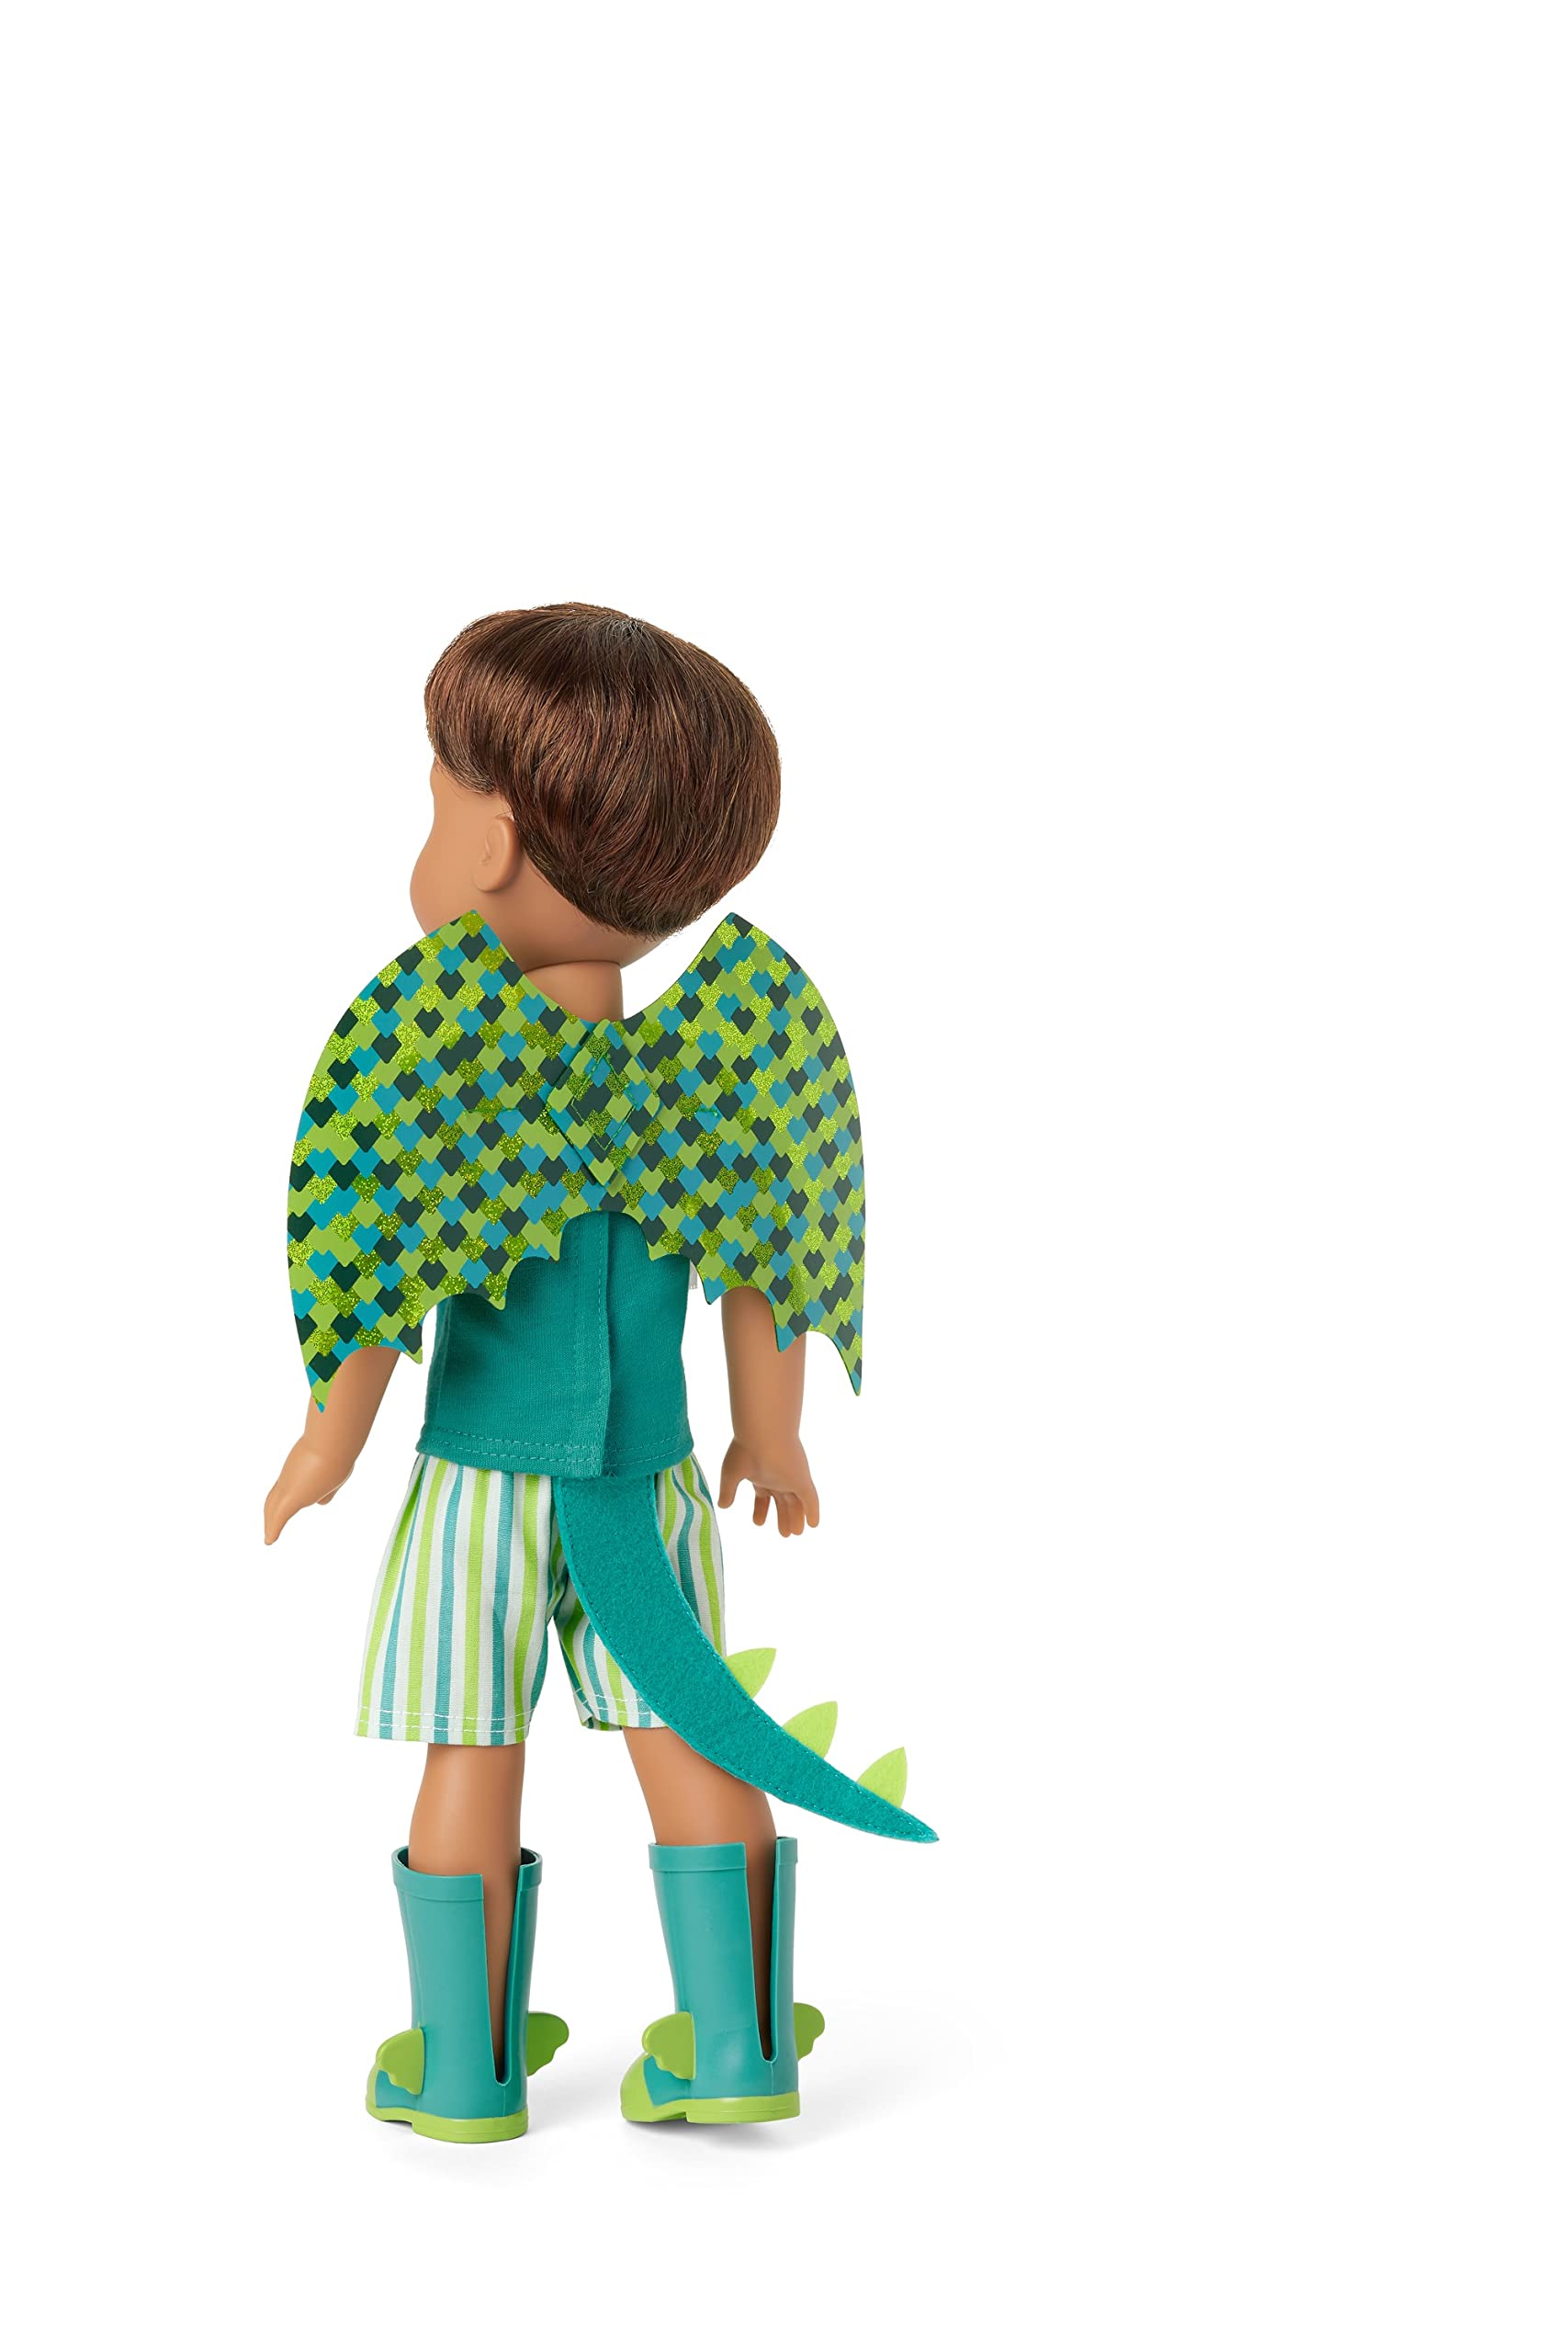 American Girl WellieWishers Bryant 14.5-inch Doll with Green Eyes, Medium Skin, Freckles, Brown Hair, a Short-Sleeved T-Shirt, Blue-and-Green Striped Shorts, Glittery Dragon Wings, Ages 4+